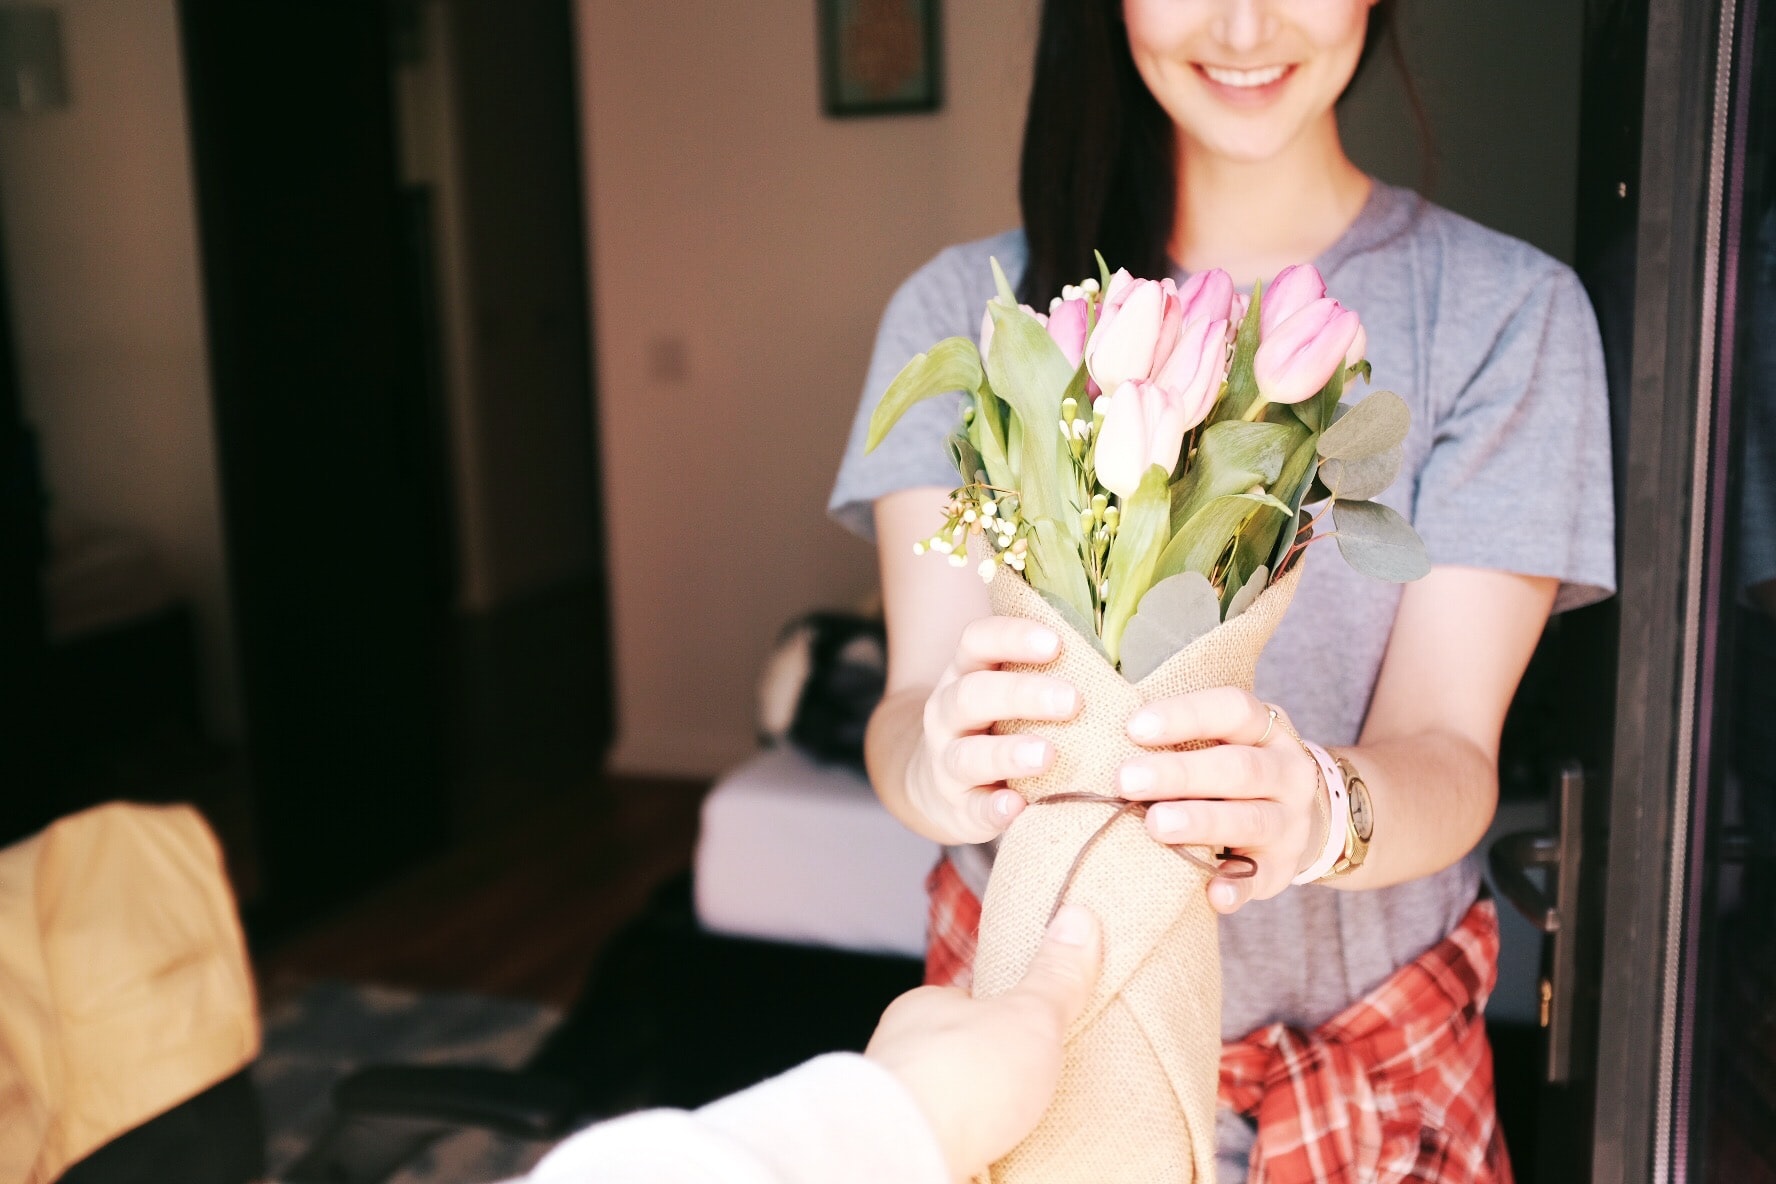 A woman accepts a bouquet of flowers.